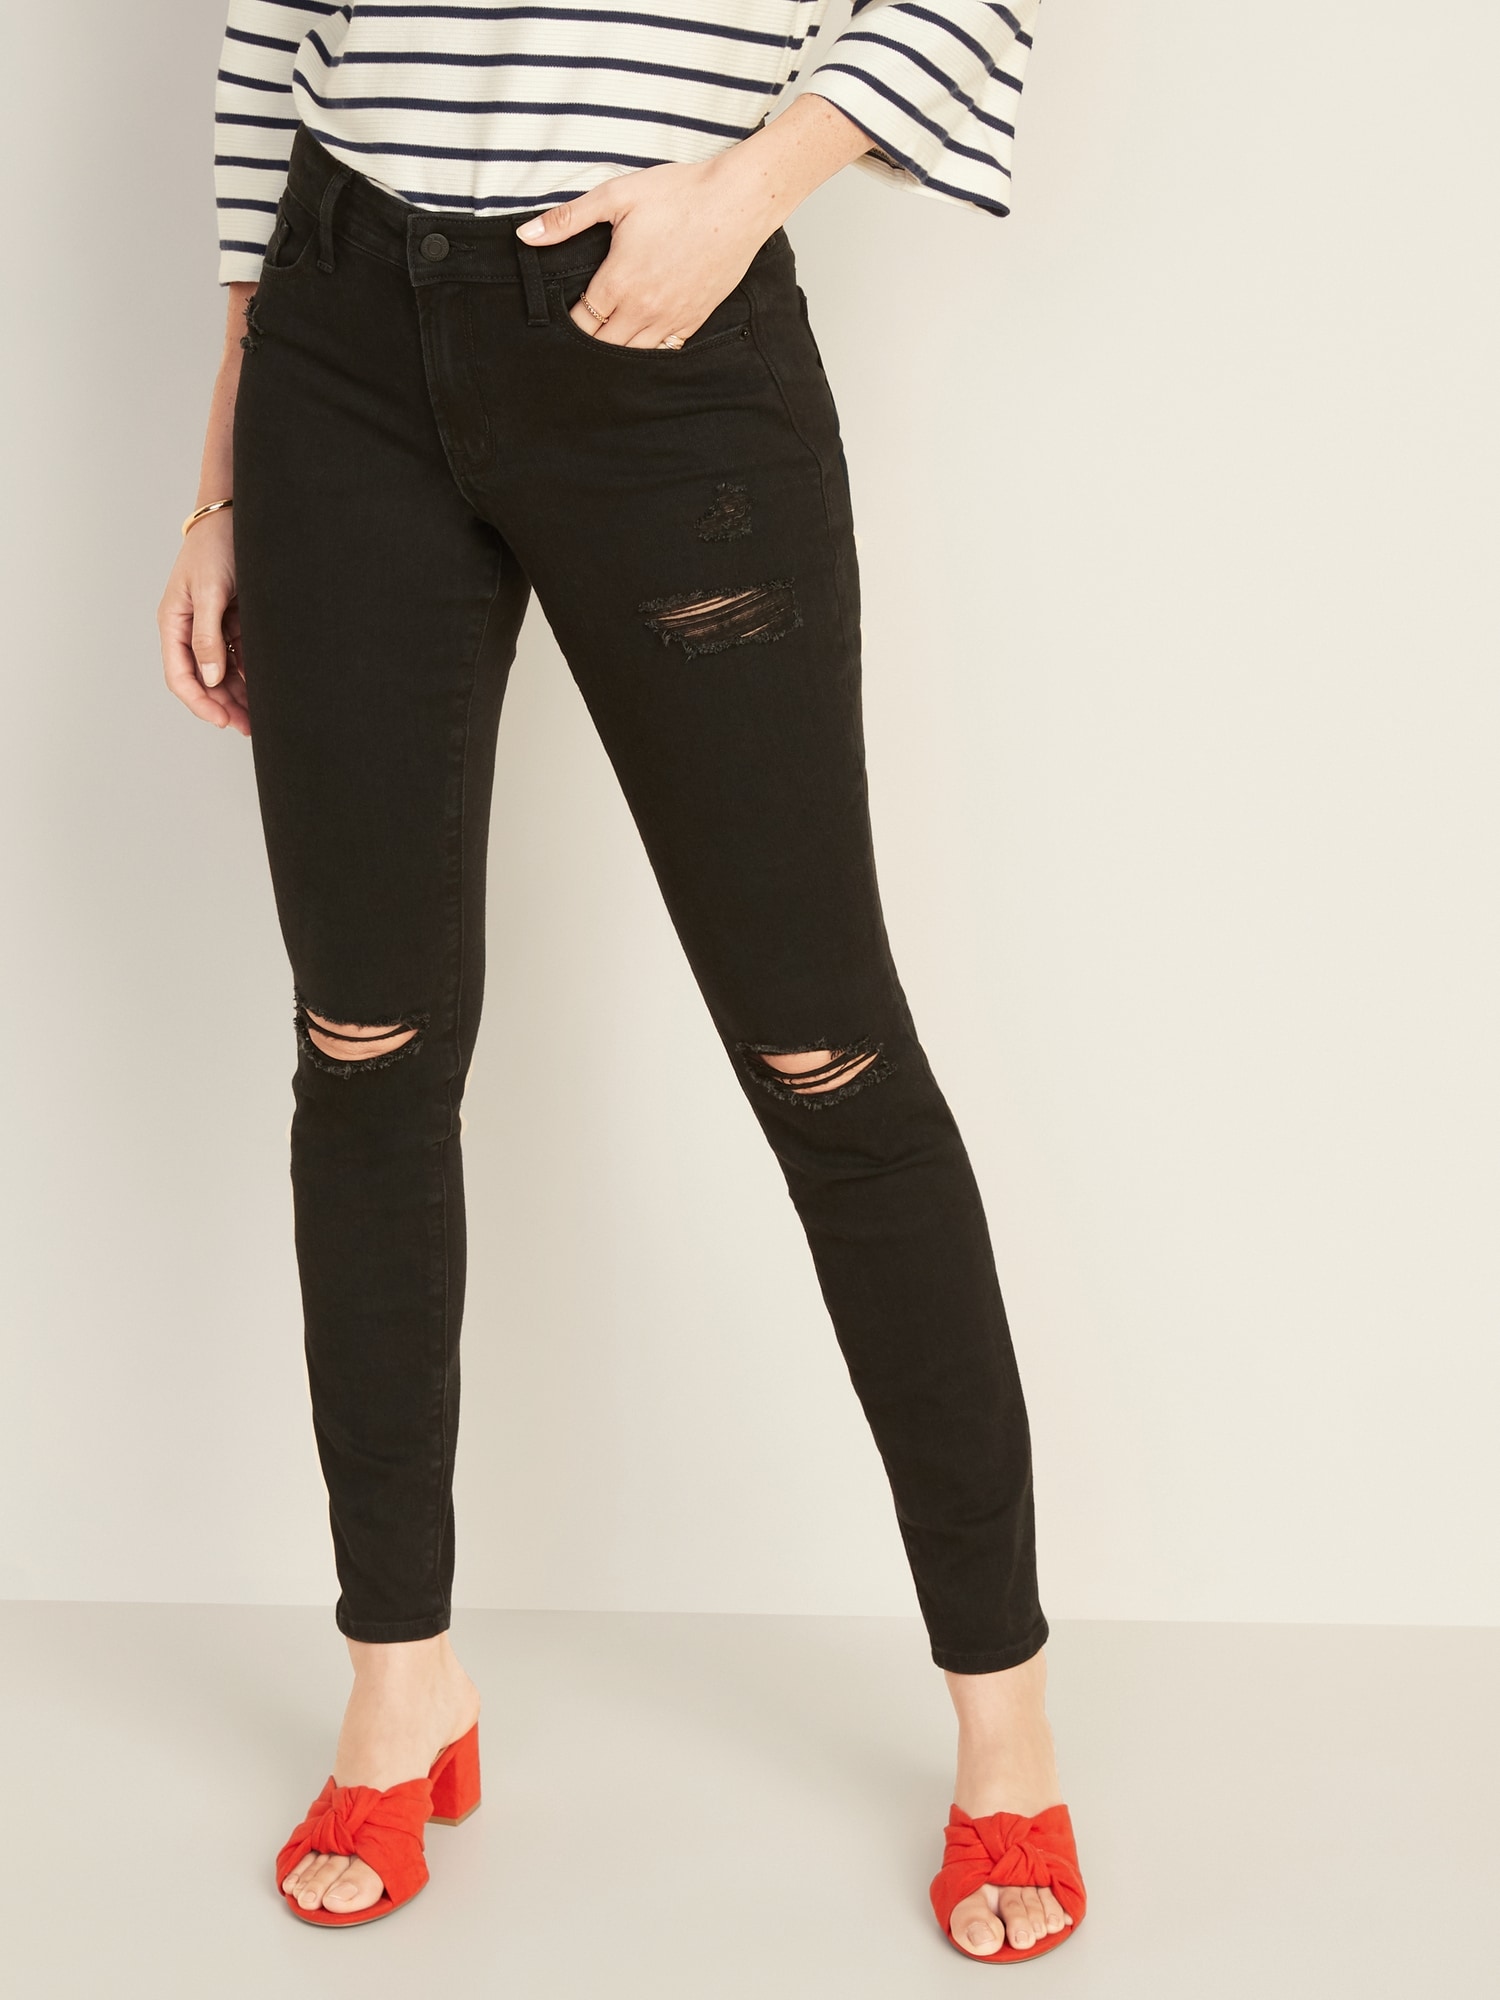 mid rise black ripped jeans